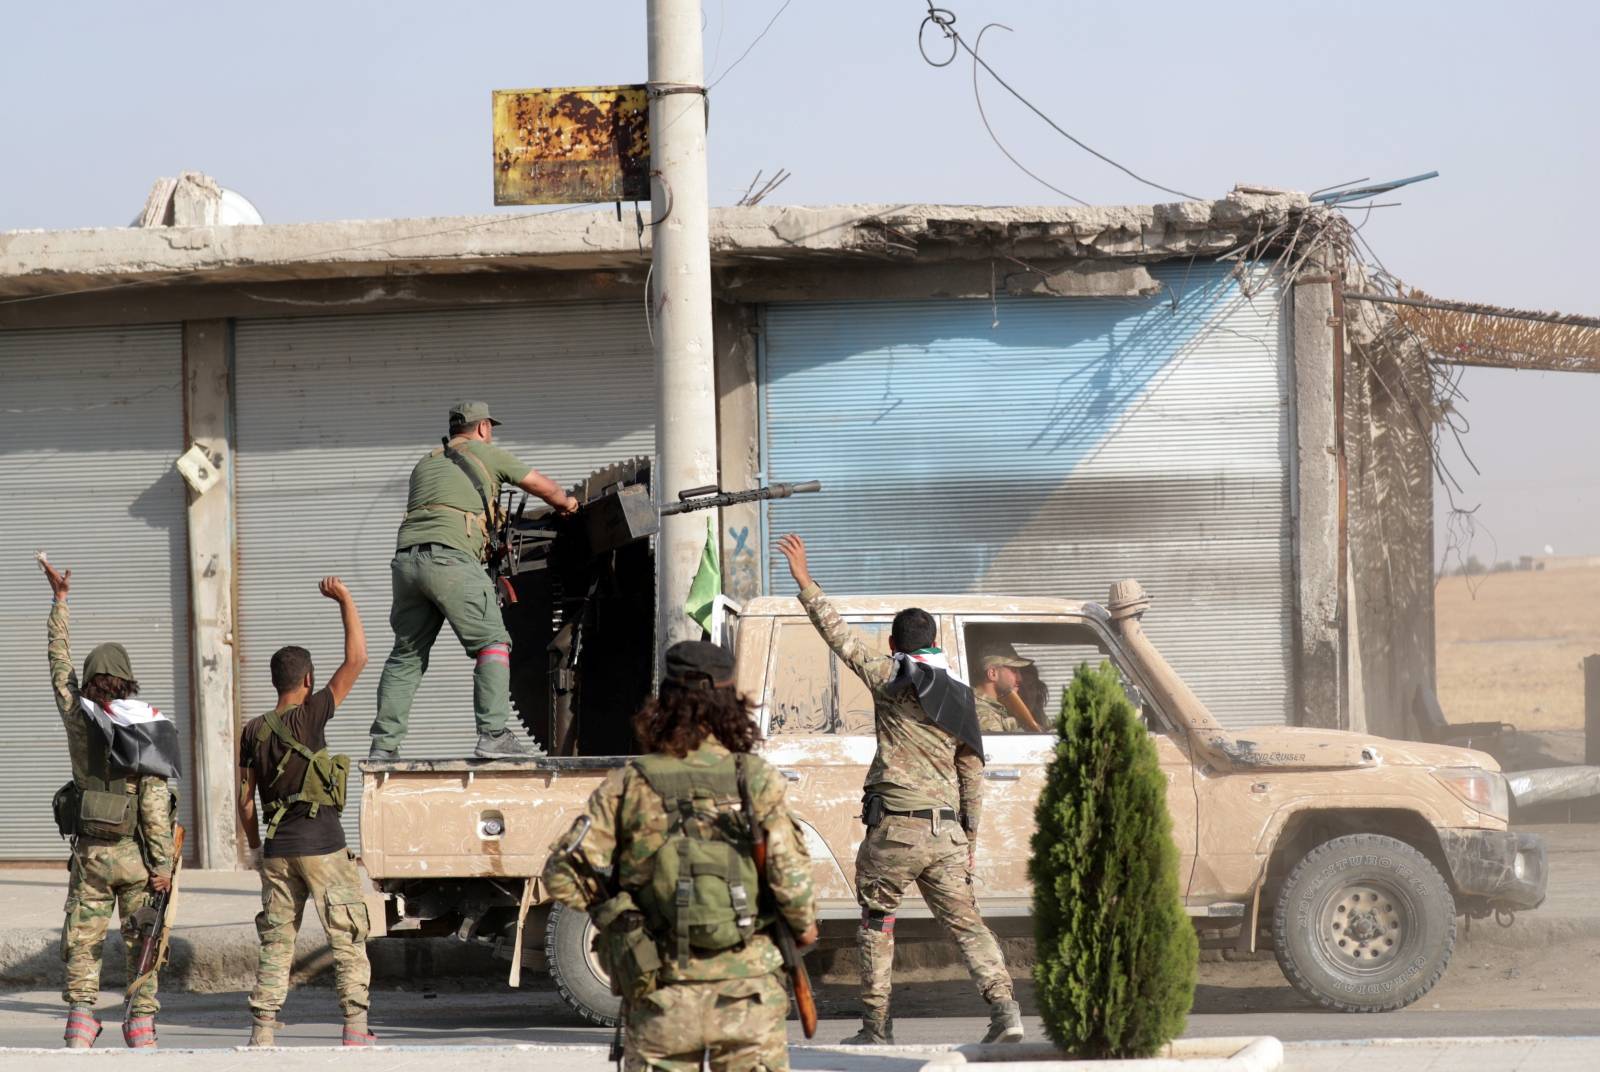 Turkey-backed Syrian fighters gesture as their comrade fires a weapon mounted on a truck in the town of Tal Abyad